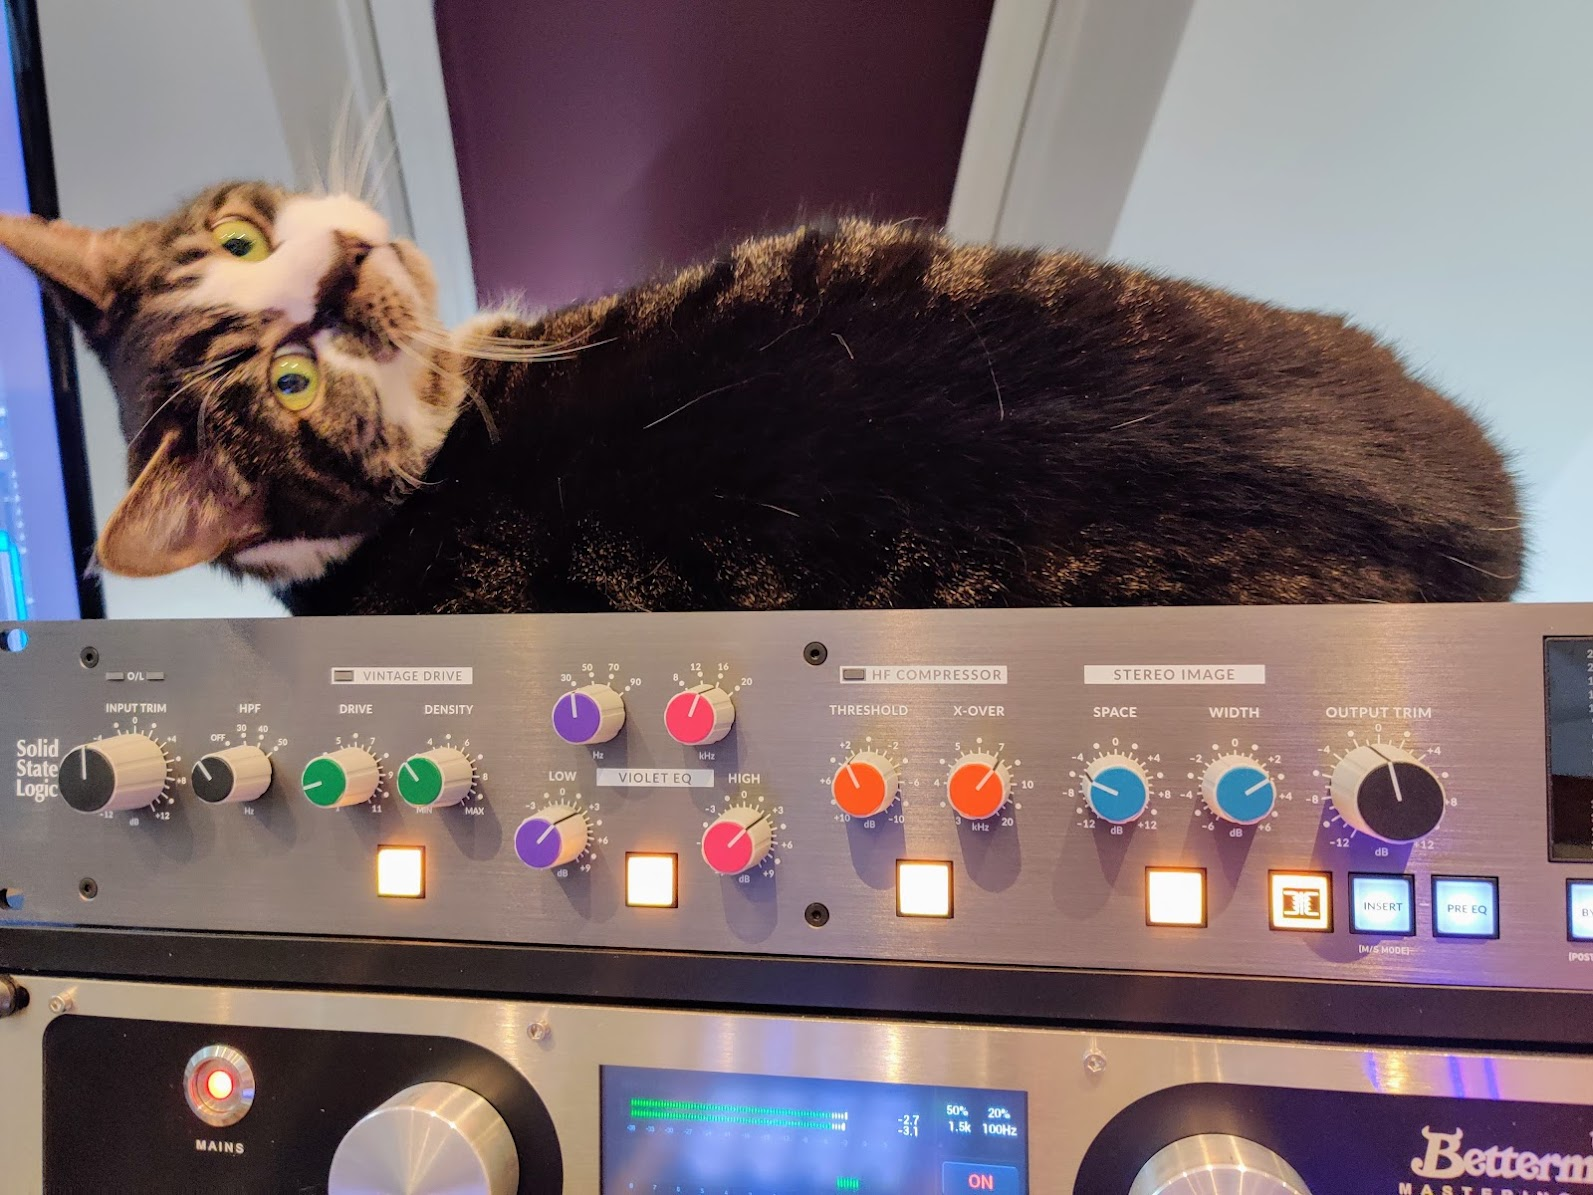 Patch the studio cat, lying on a nice warm piece of Studio equipment facing back